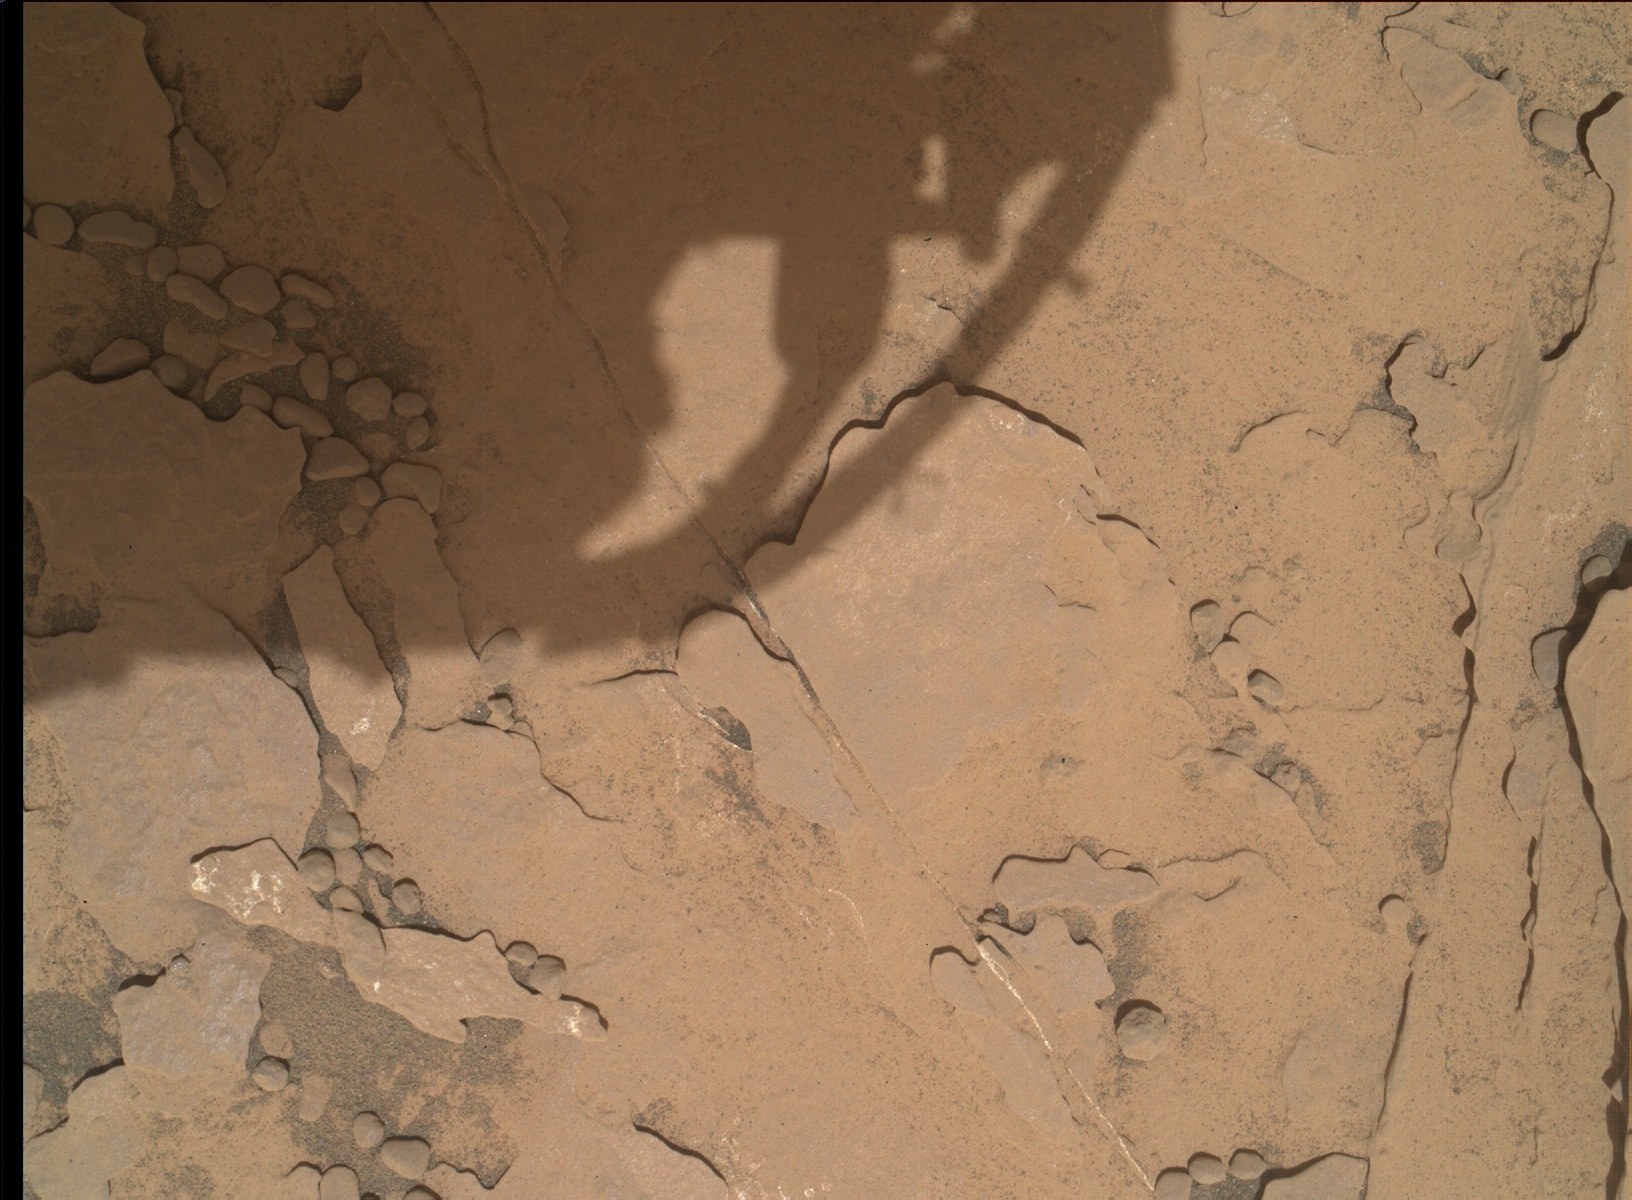 Nasa's Mars rover Curiosity acquired this image using its Mars Hand Lens Imager (MAHLI) on Sol 2057